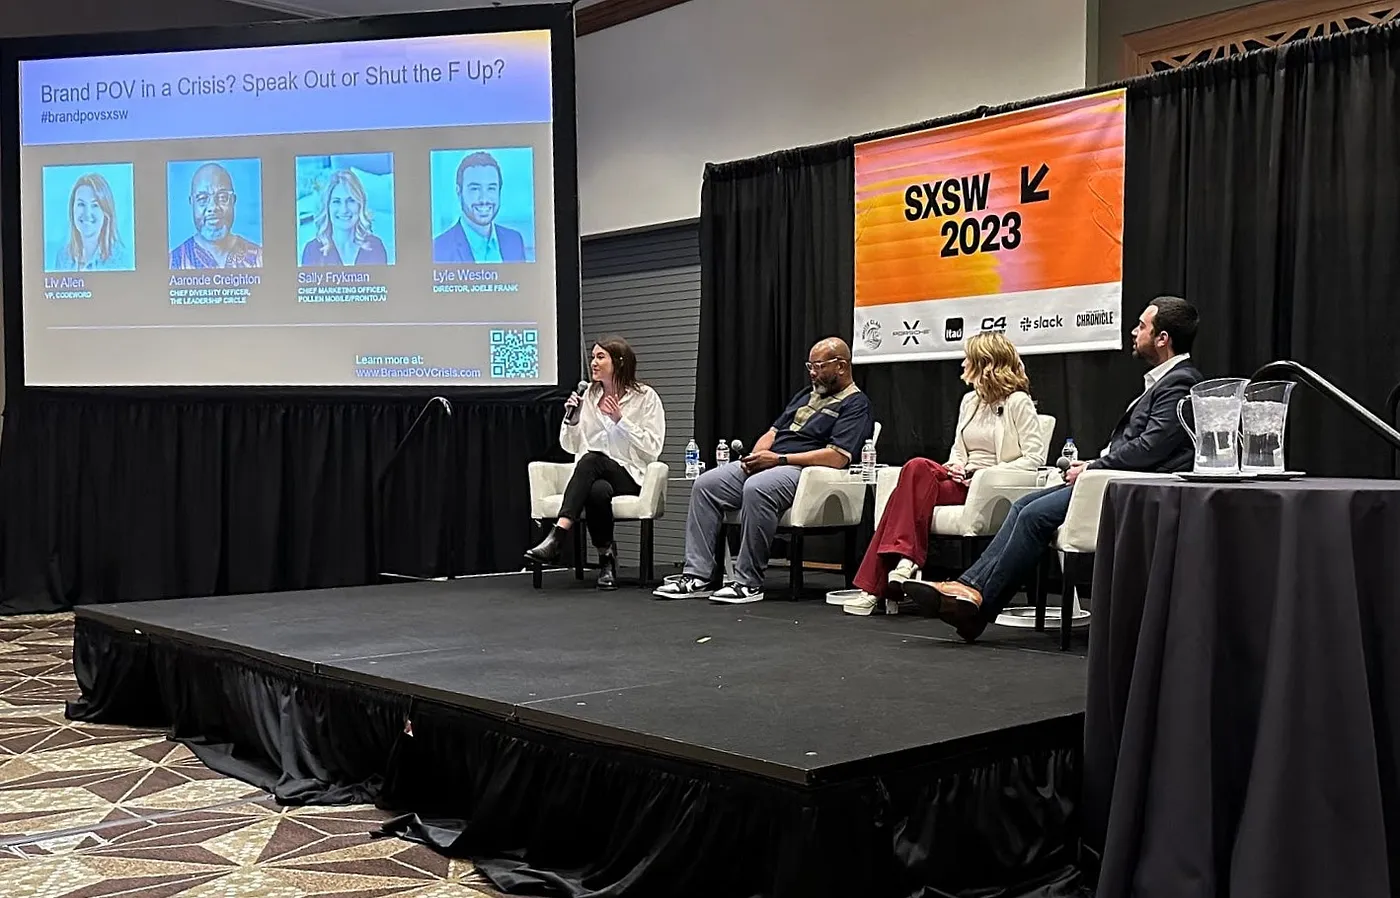 Liv Allen, VP at Codeword, Aaronde Creighton, Chief Diversity Officer at Leadership Circle, Sally Frykman, and Lyle Weston, Director at Joele Frank